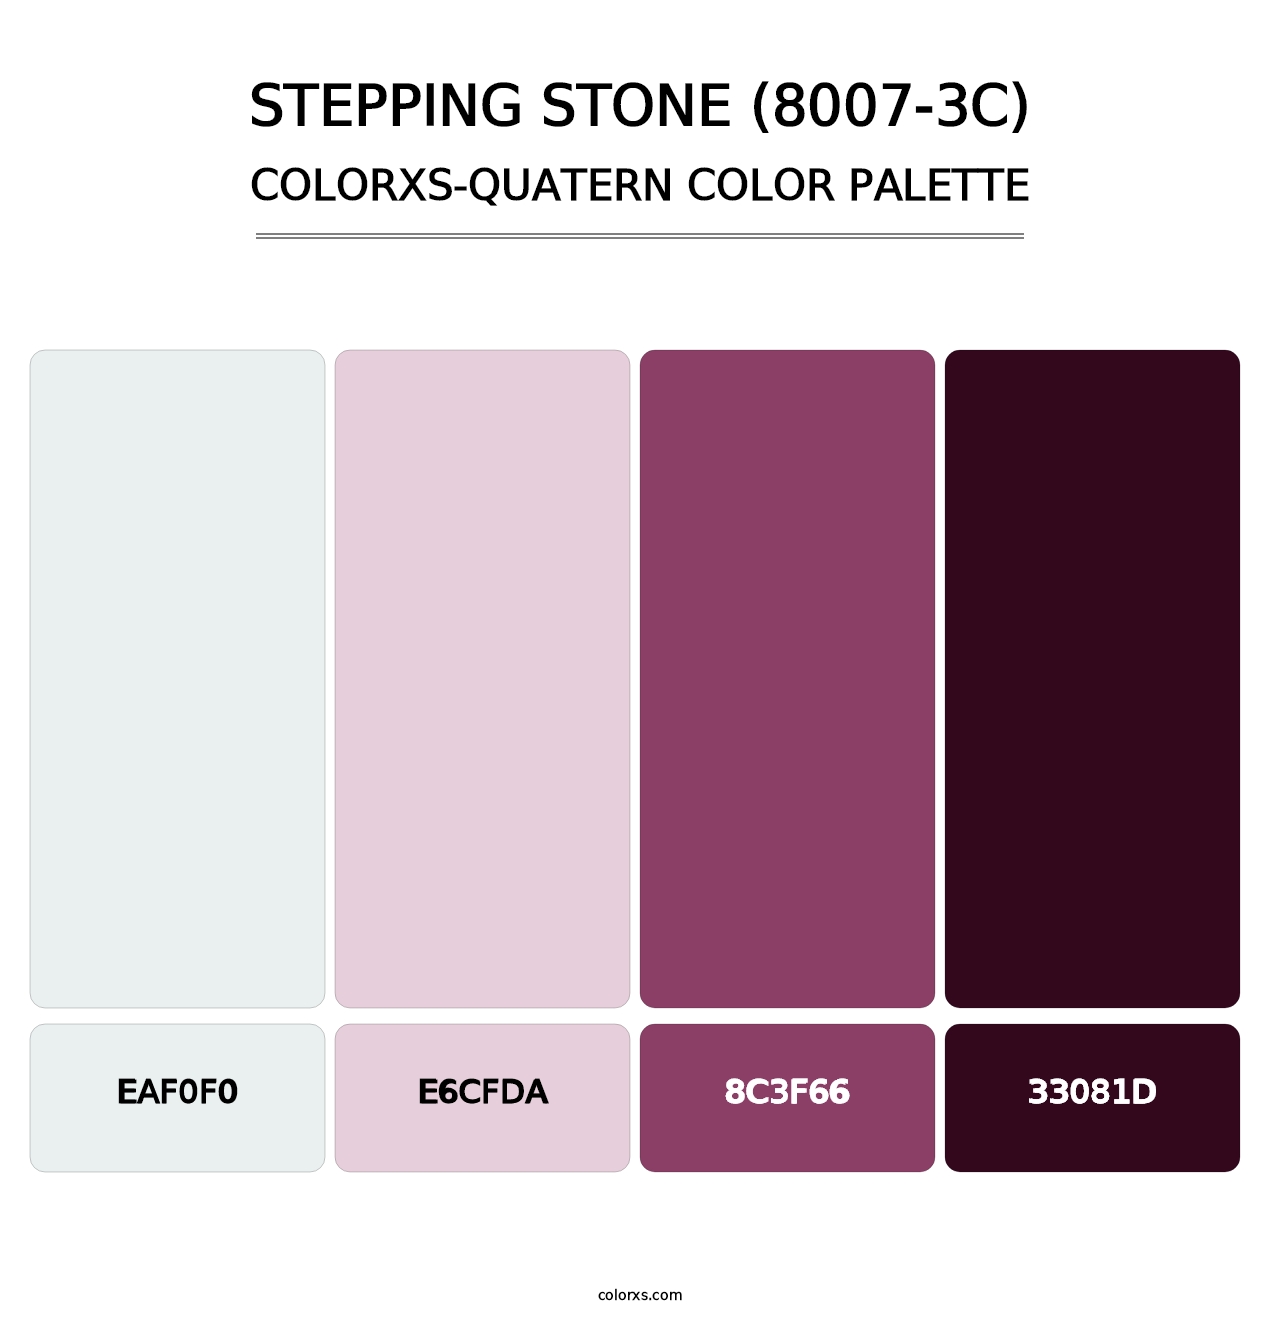 Stepping Stone (8007-3C) - Colorxs Quatern Palette